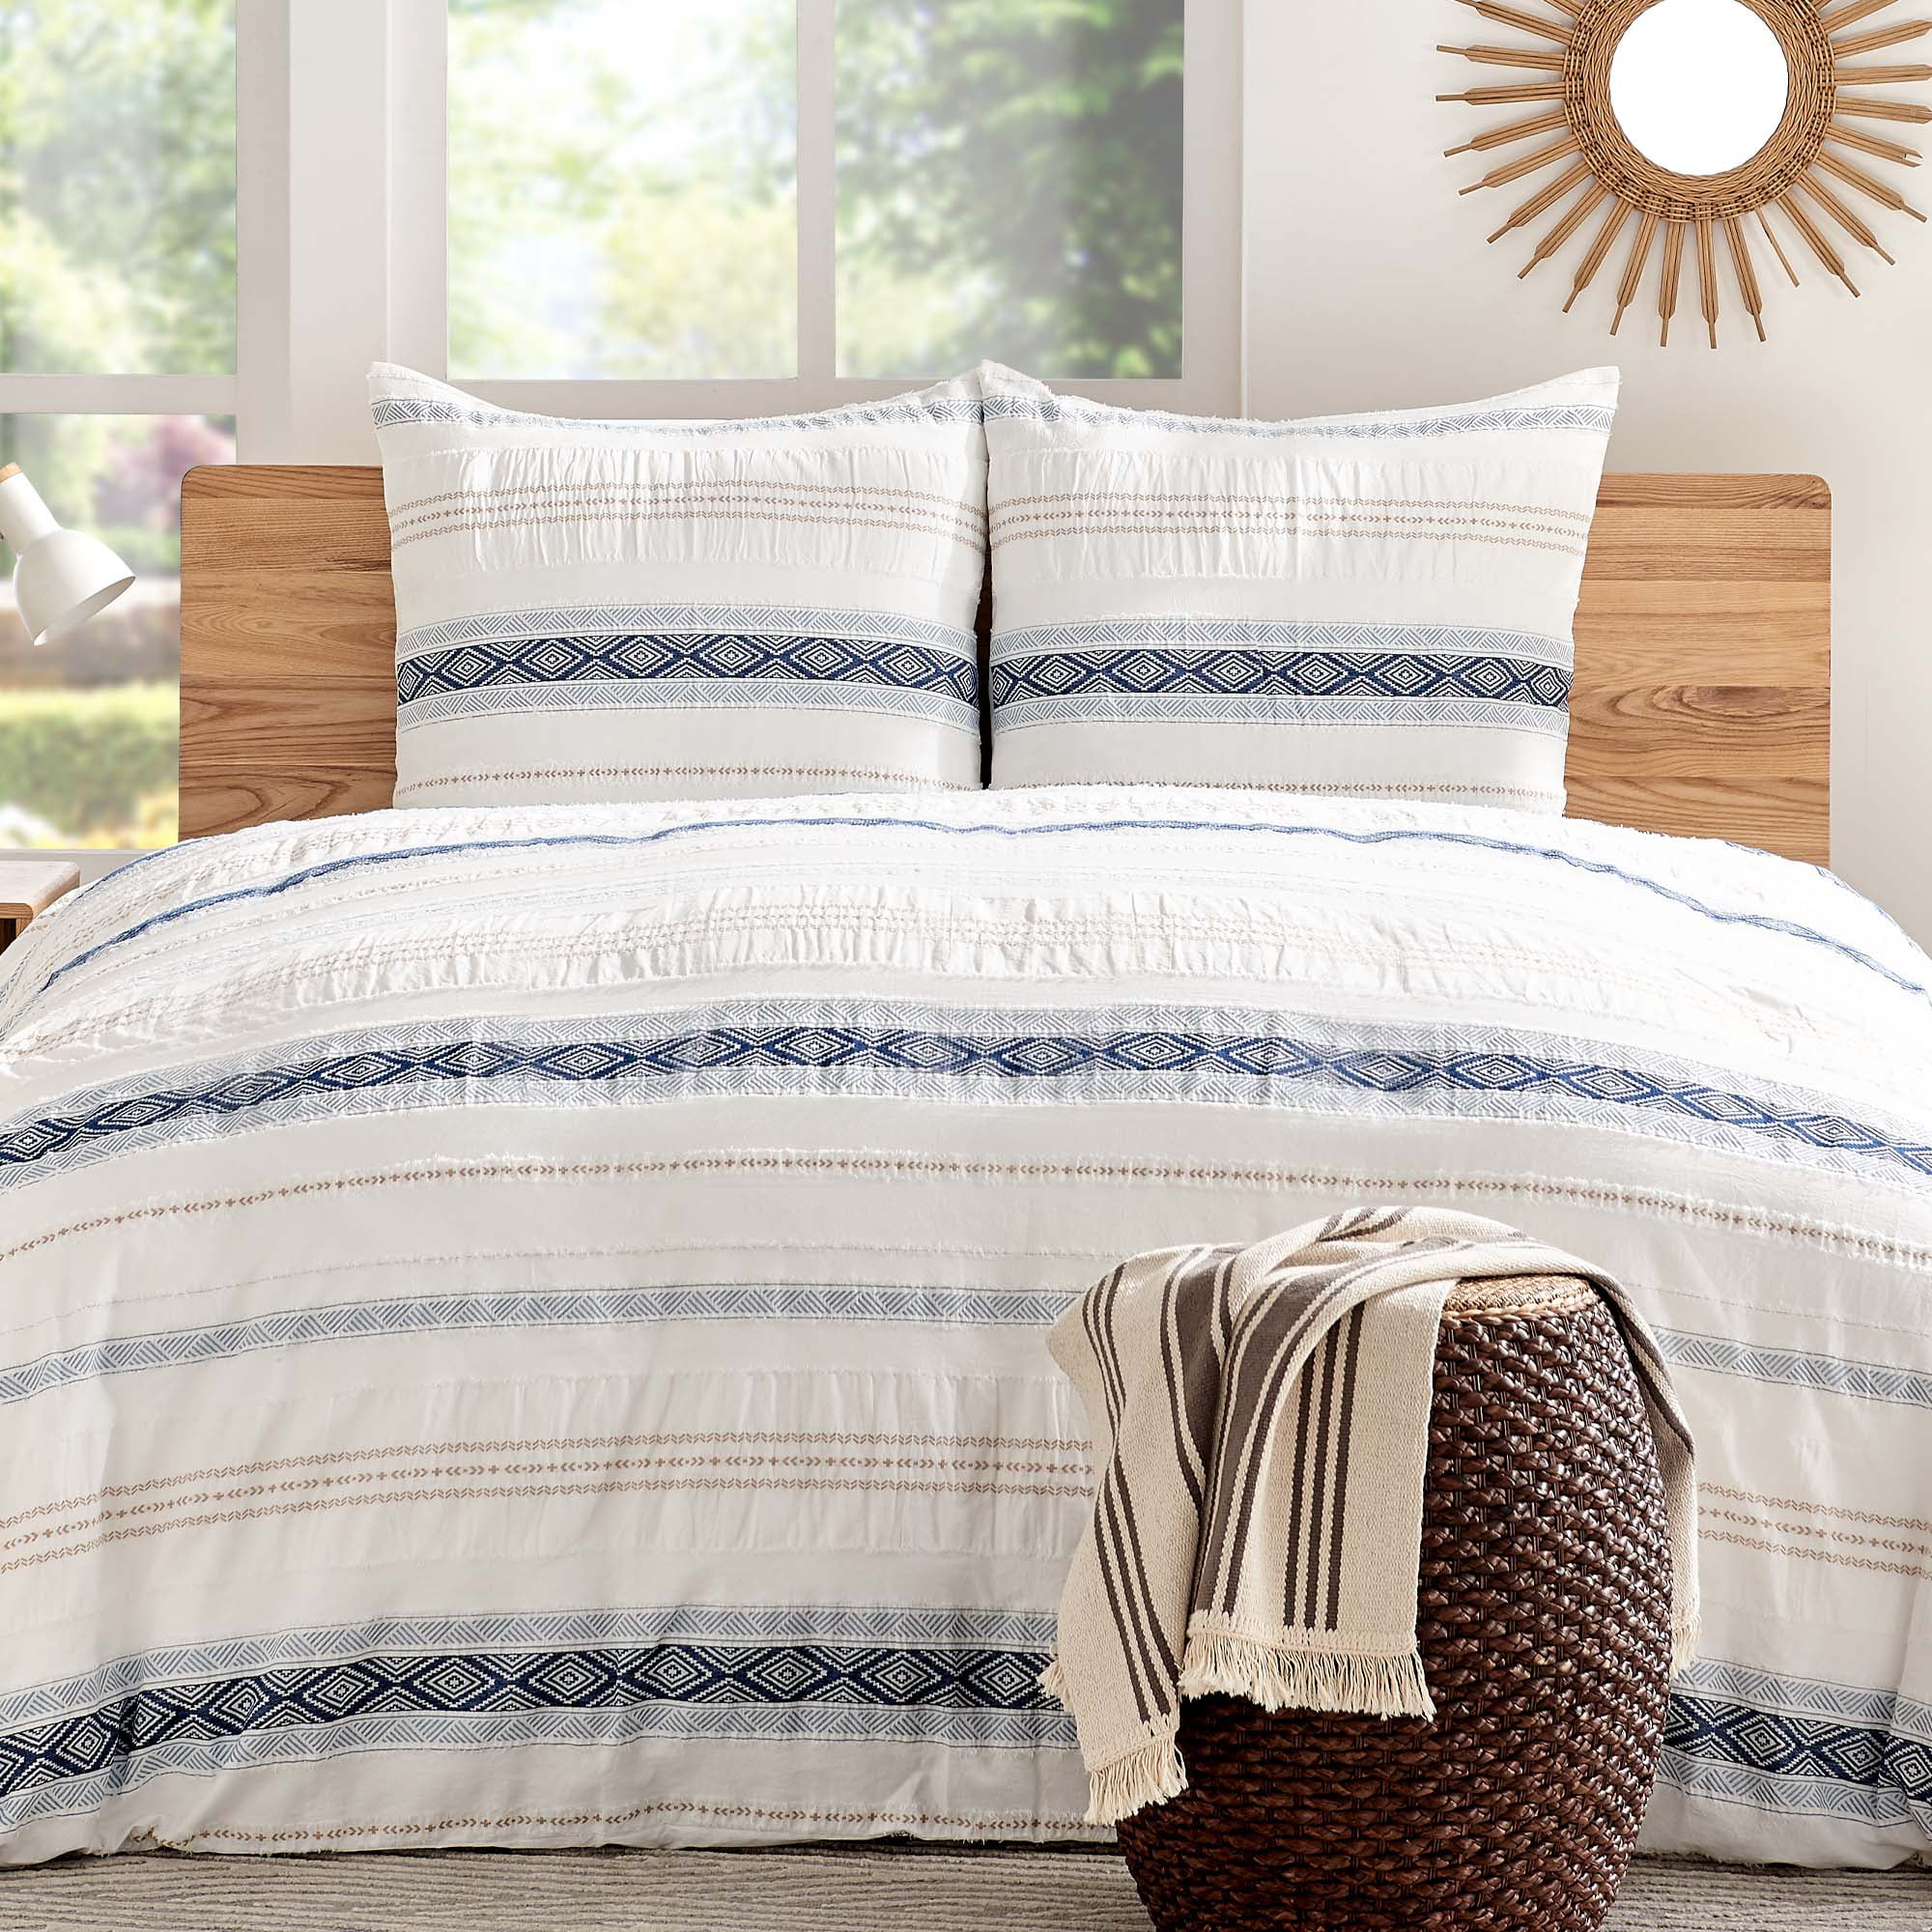  Levtex Home - Pickford Comforter Set - King Comforter + Two King  Pillow Cases - Blue, Taupe, Off-White - Jacquard Tribal - Comforter (106 x  94in.) and Pillow Case (36 x 20in.) - Cotton : Home & Kitchen